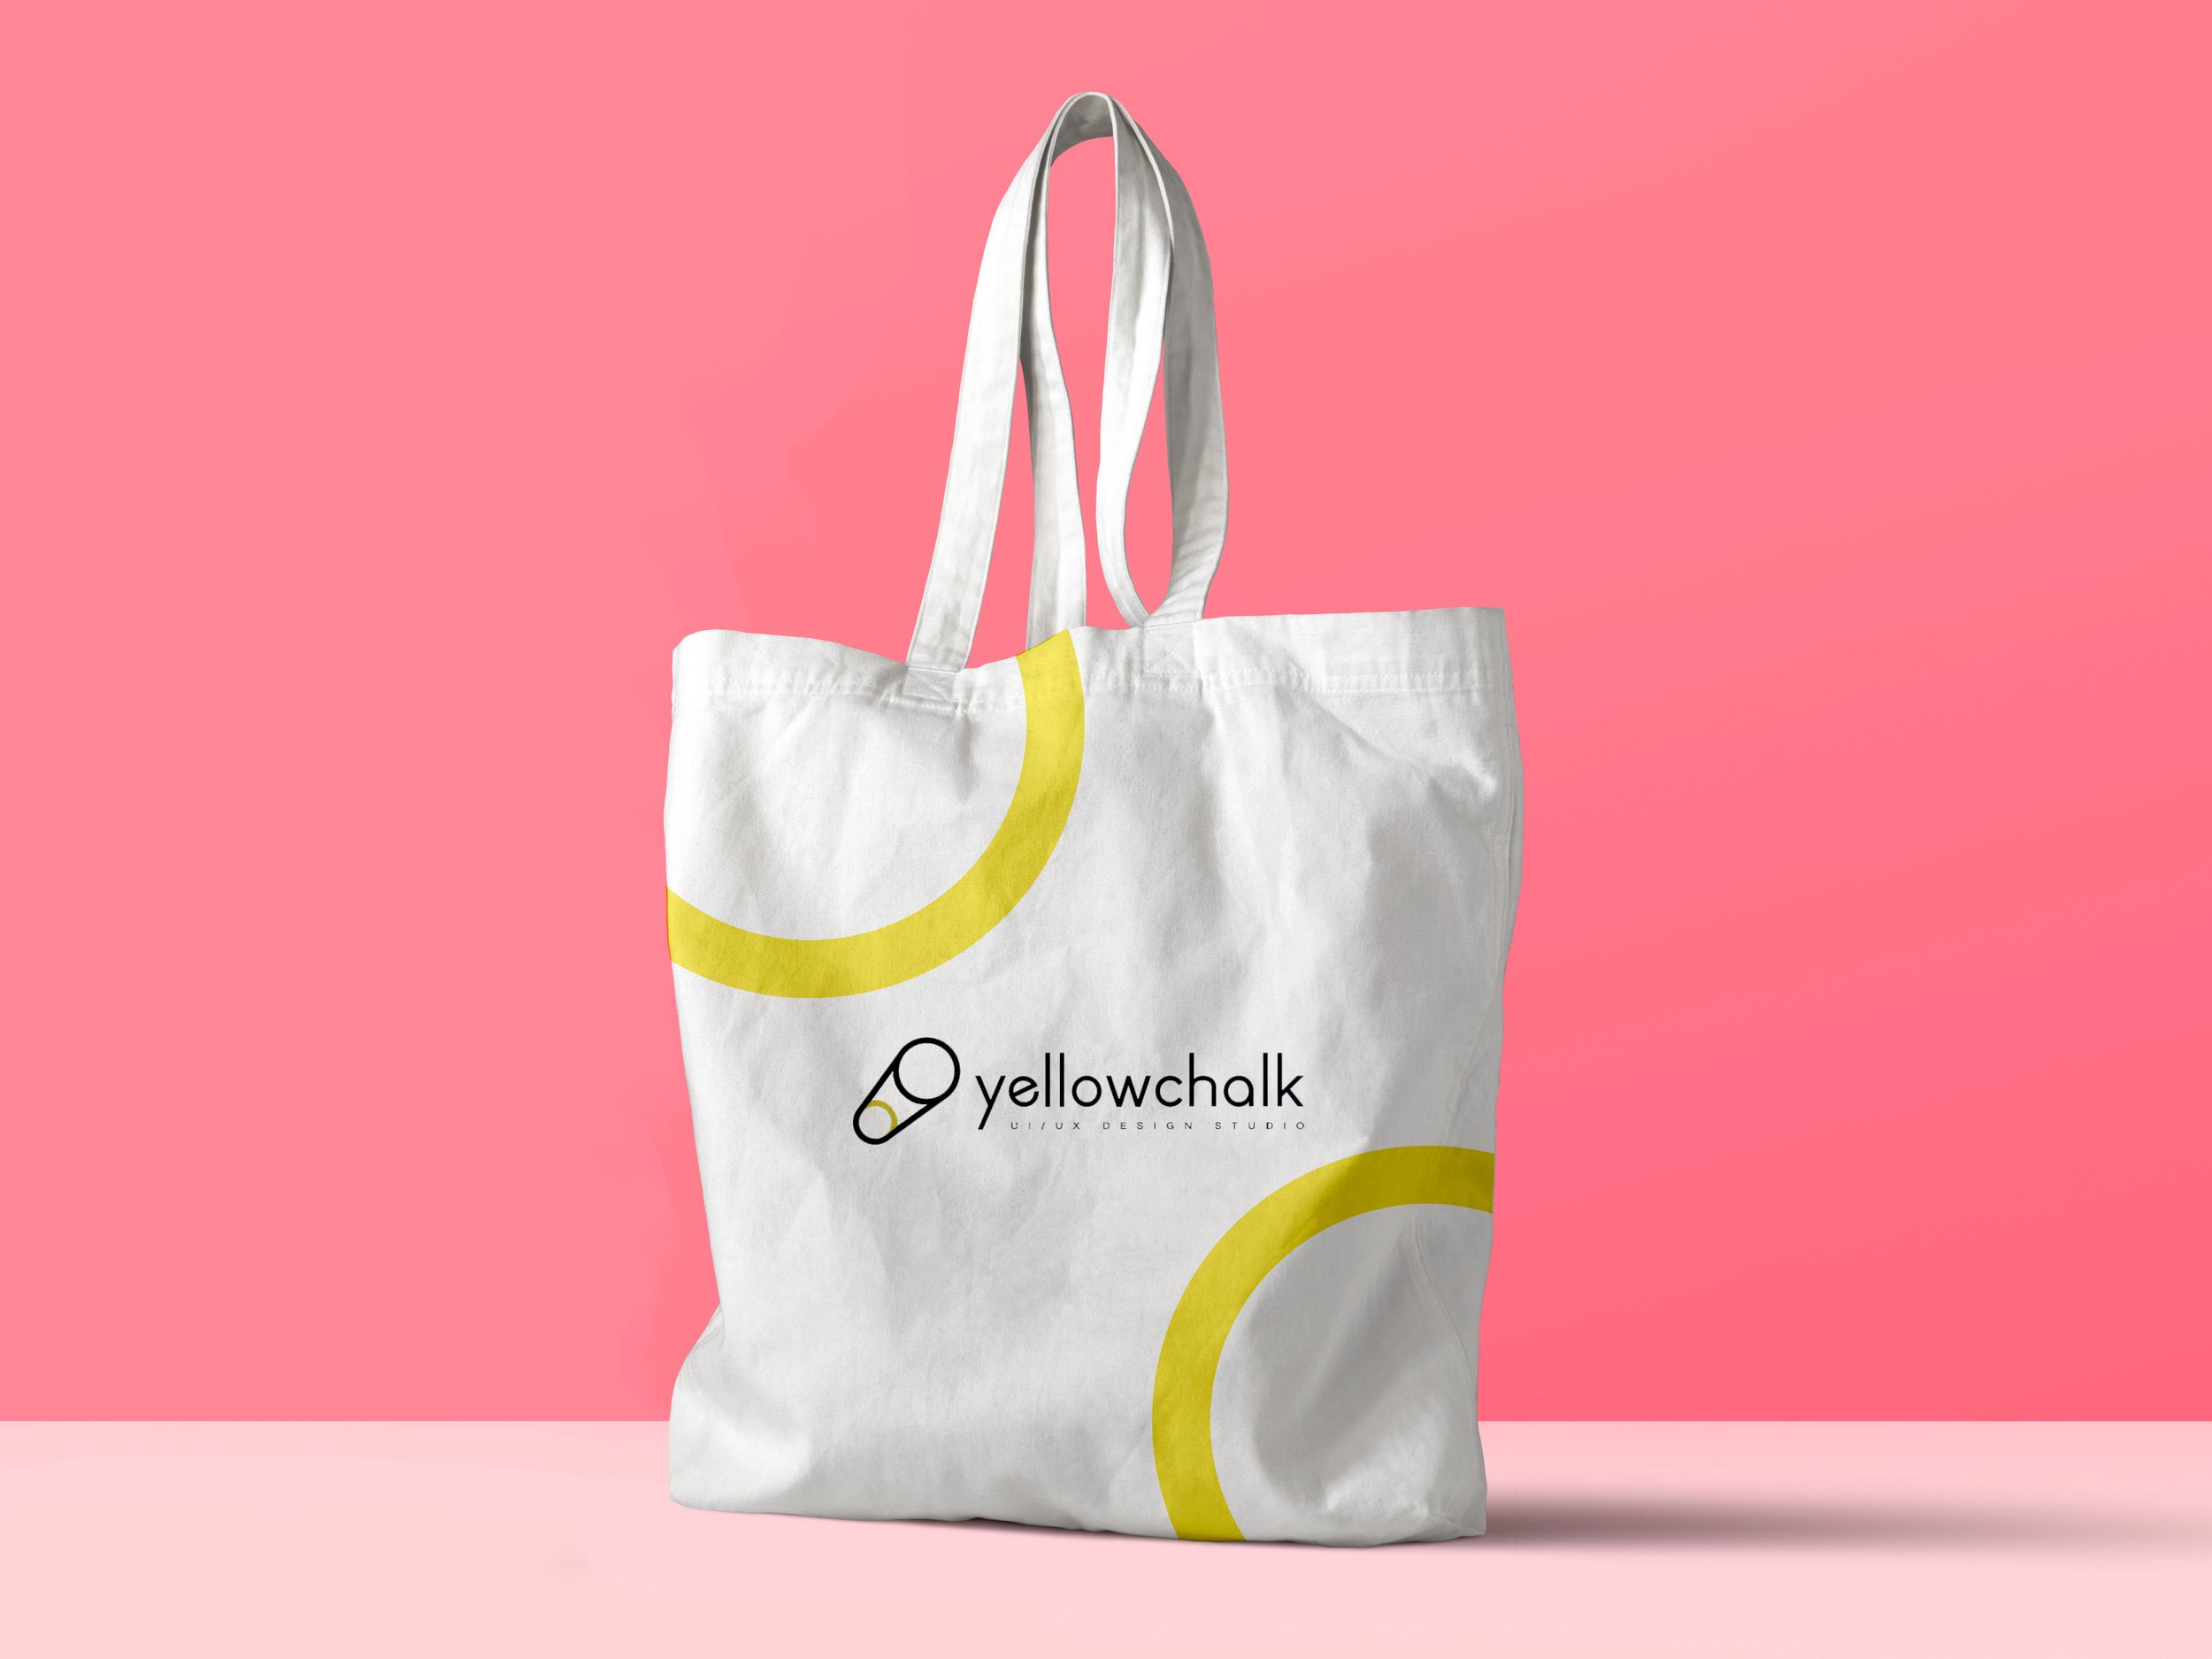 Custom Printed Promotional Bags  Totes in Canada